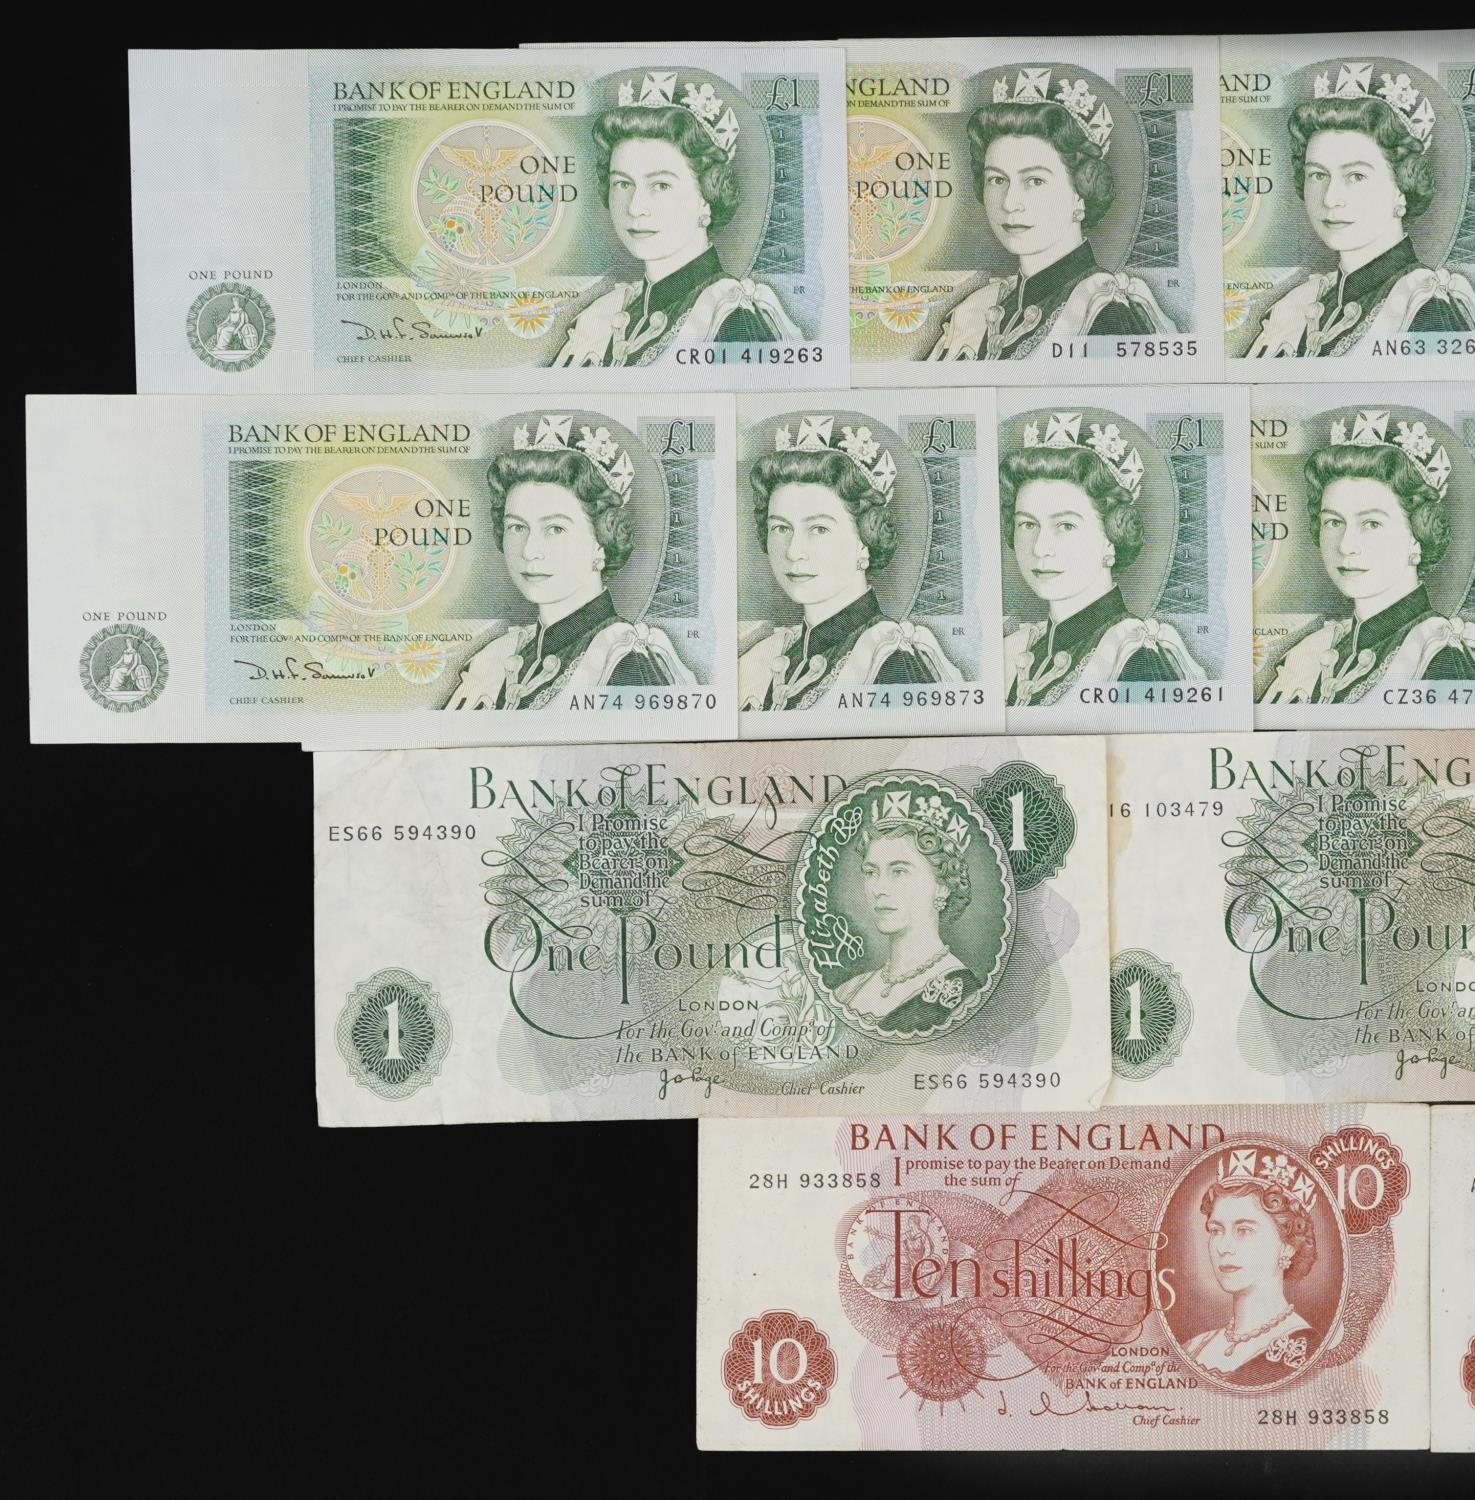 Elizabeth II Bank of England banknotes, various Chief Cashiers, including one pound note with serial - Image 2 of 3